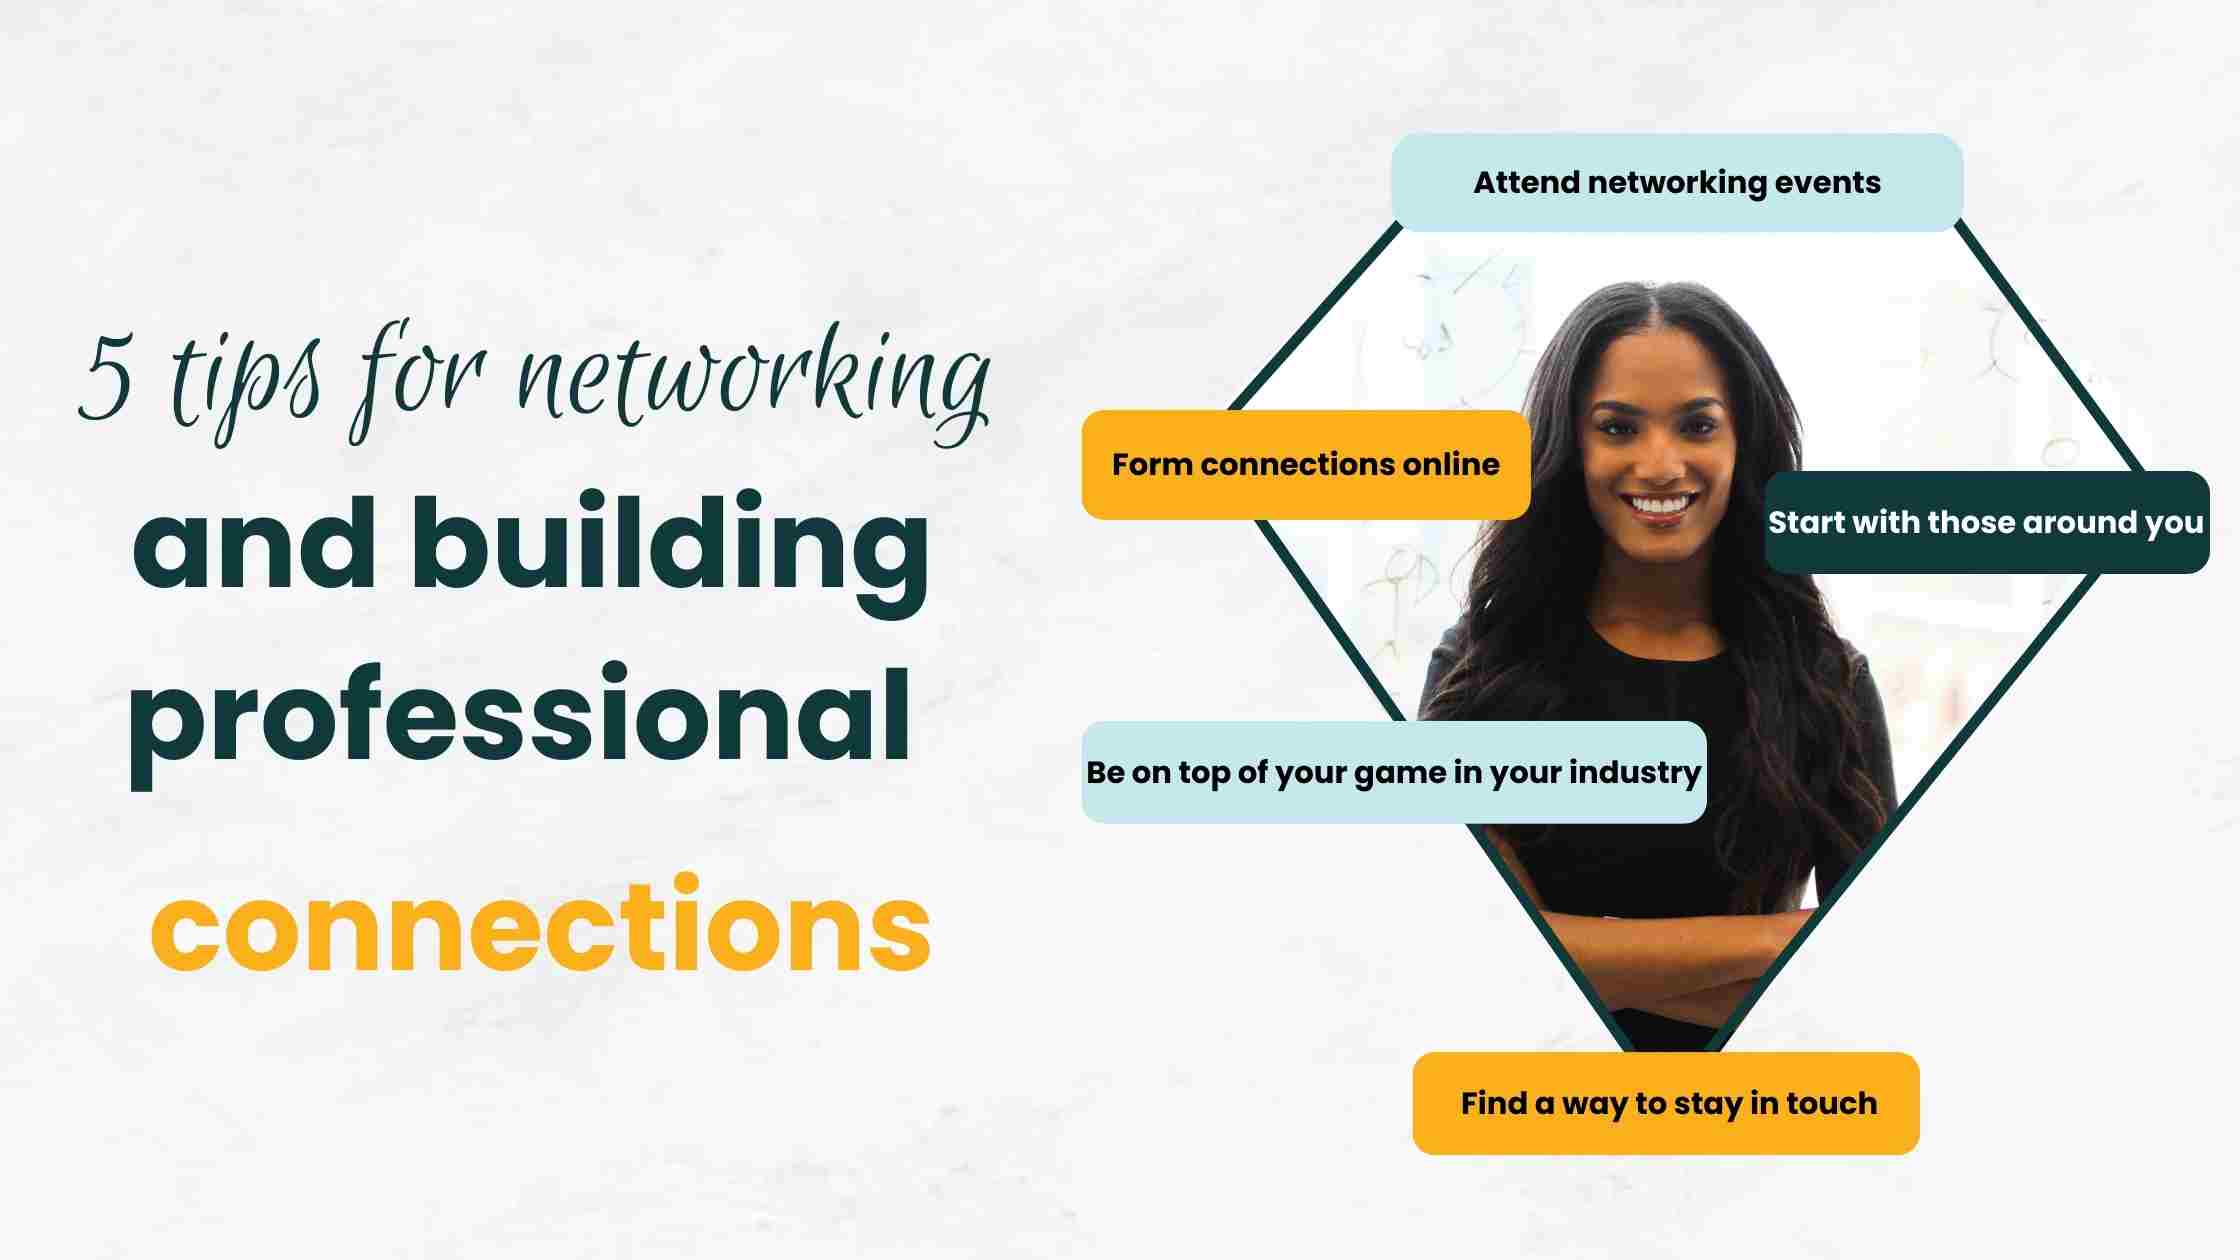 5 tips for networking and building professionalconnections